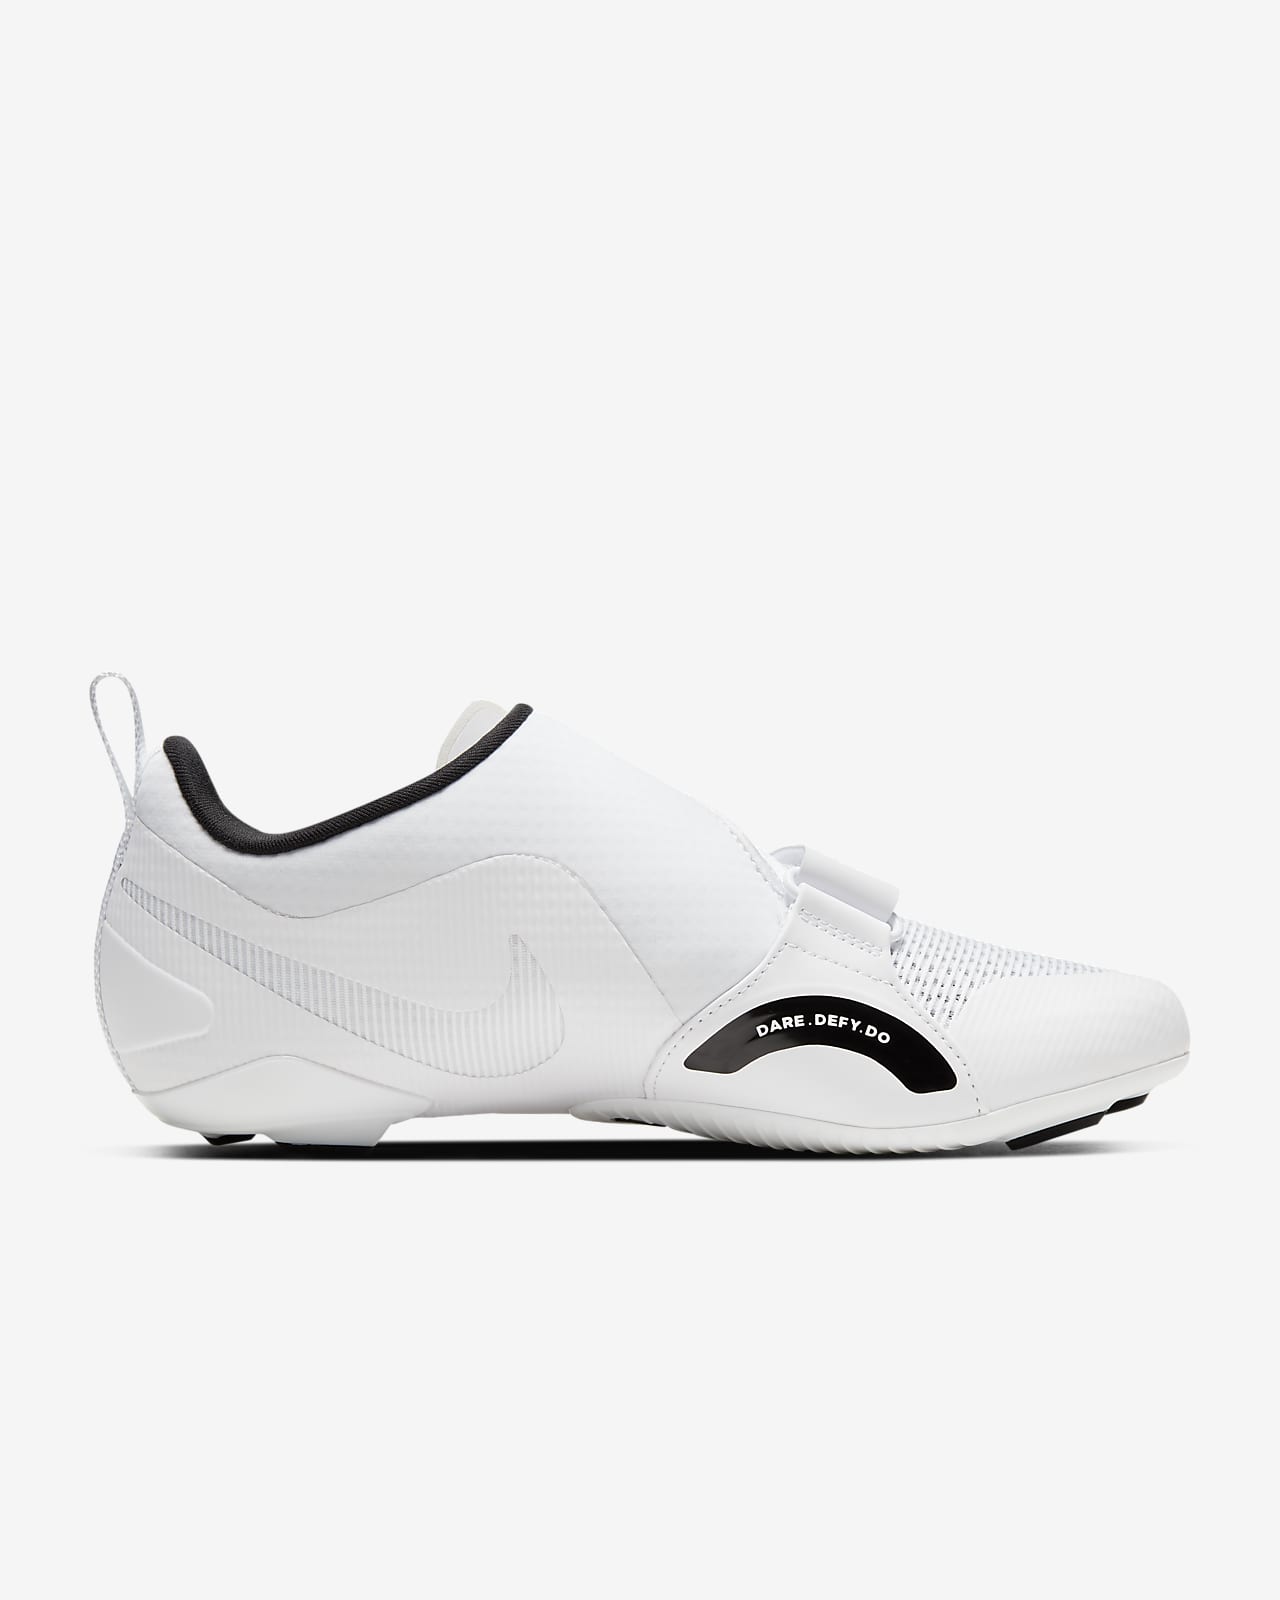 nike men's spin shoes